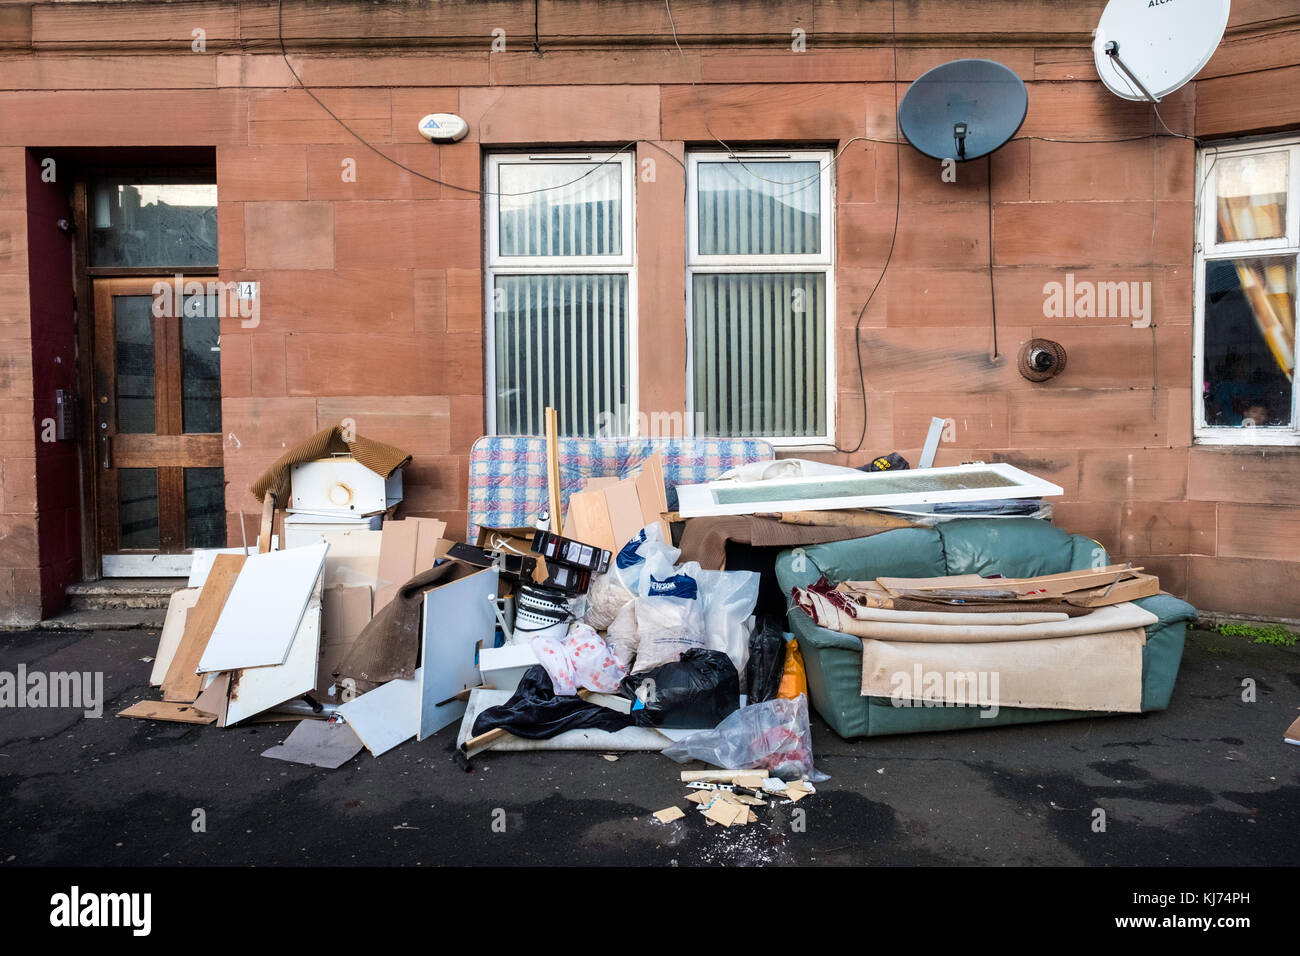 Rubbish piled on the street outside tenement building in Govanhill district of Glasgow, Scotland, United Kingdom Stock Photo